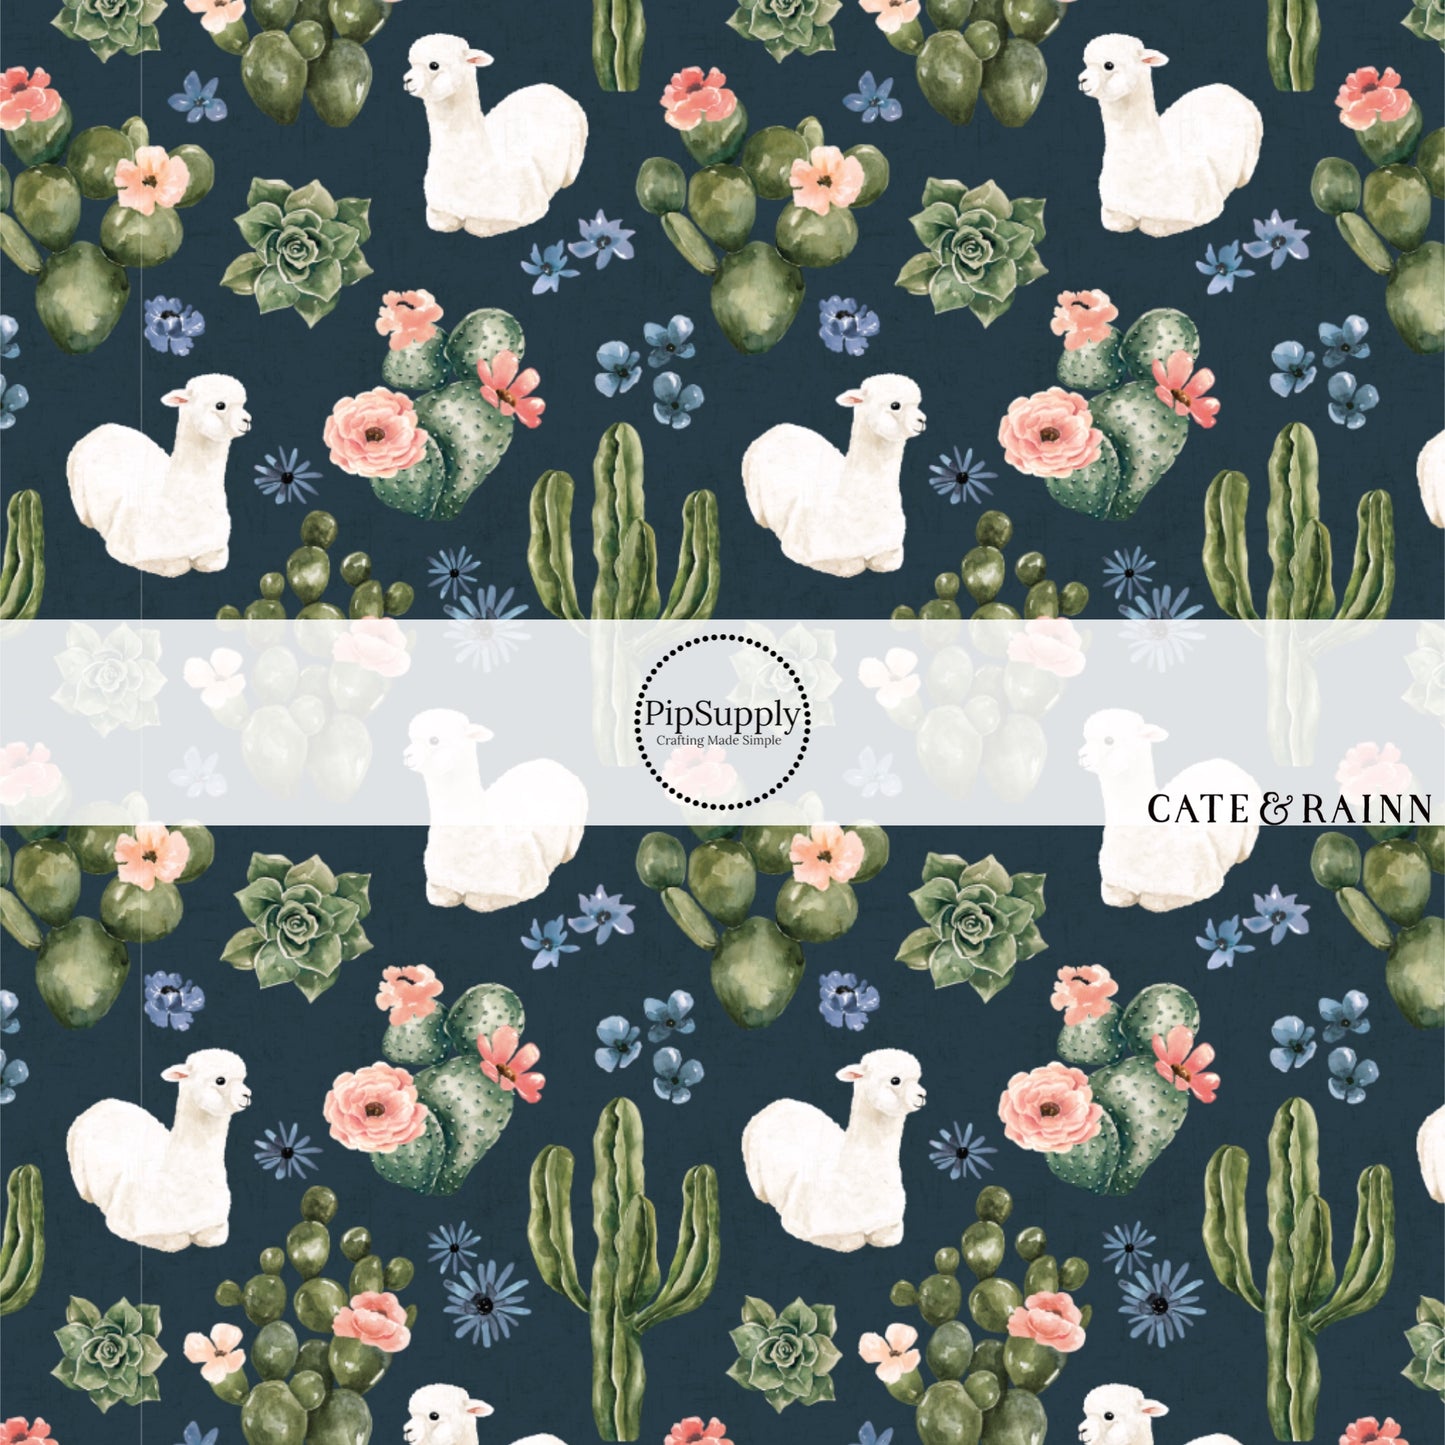 These llamas, cacti, and flower pattern themed fabric by the yard features white llamas surrounded by pink and blue flower bunches and cacti on dark blue. This fun floral fabric can be used for all your sewing and crafting needs!